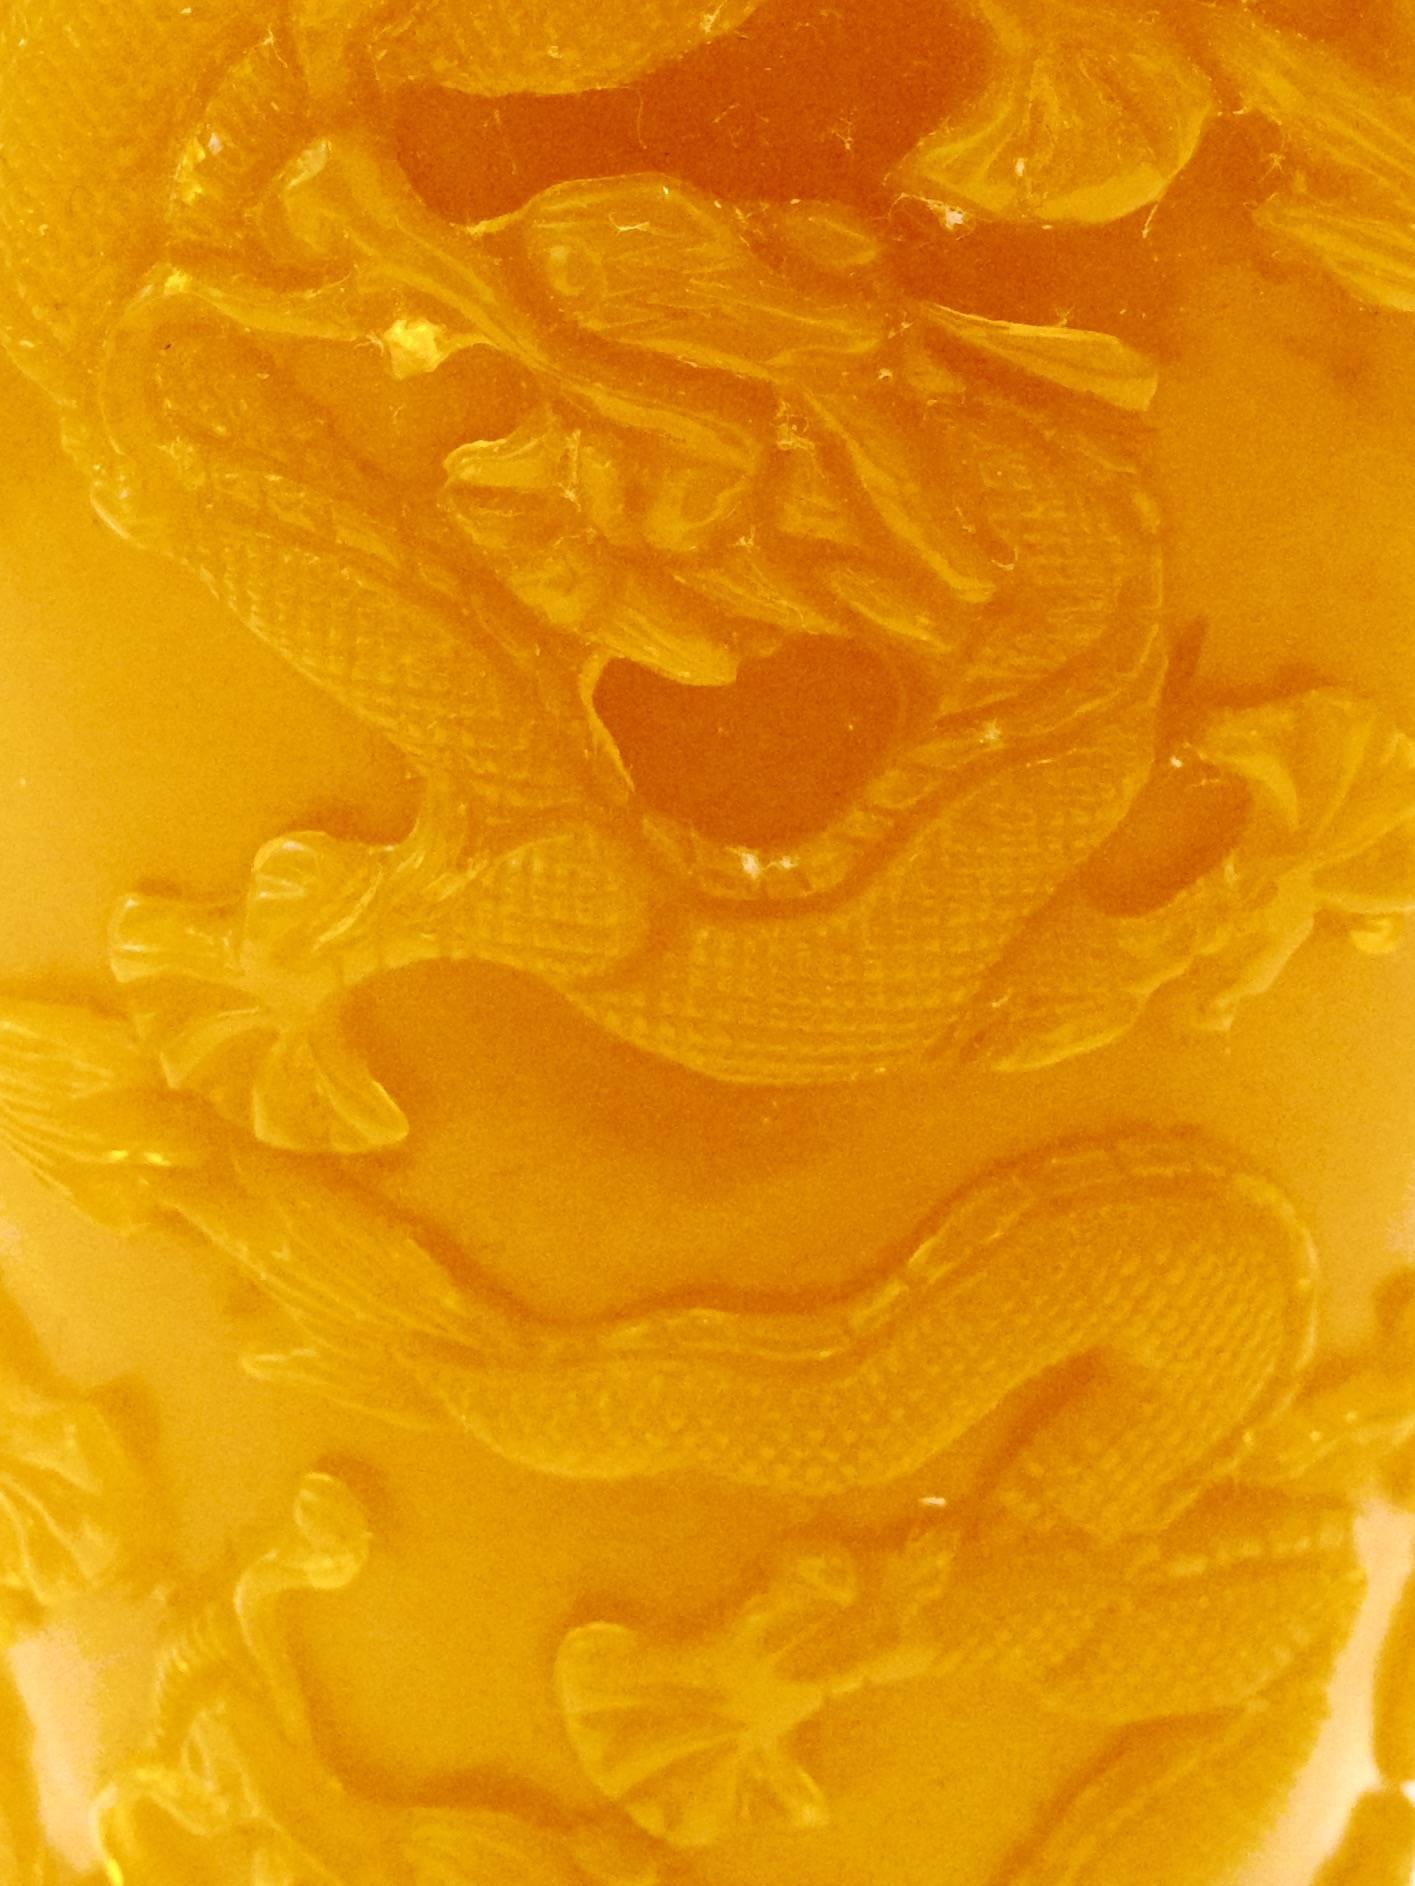 Chinese Imperial yellow carved and textured Peking glass vase. Intricate and detailed carved dragon and phoenix rejoicing motif. Great detail at base and neck. Makers mark appears on the underside.
Please see our listing for a second almost